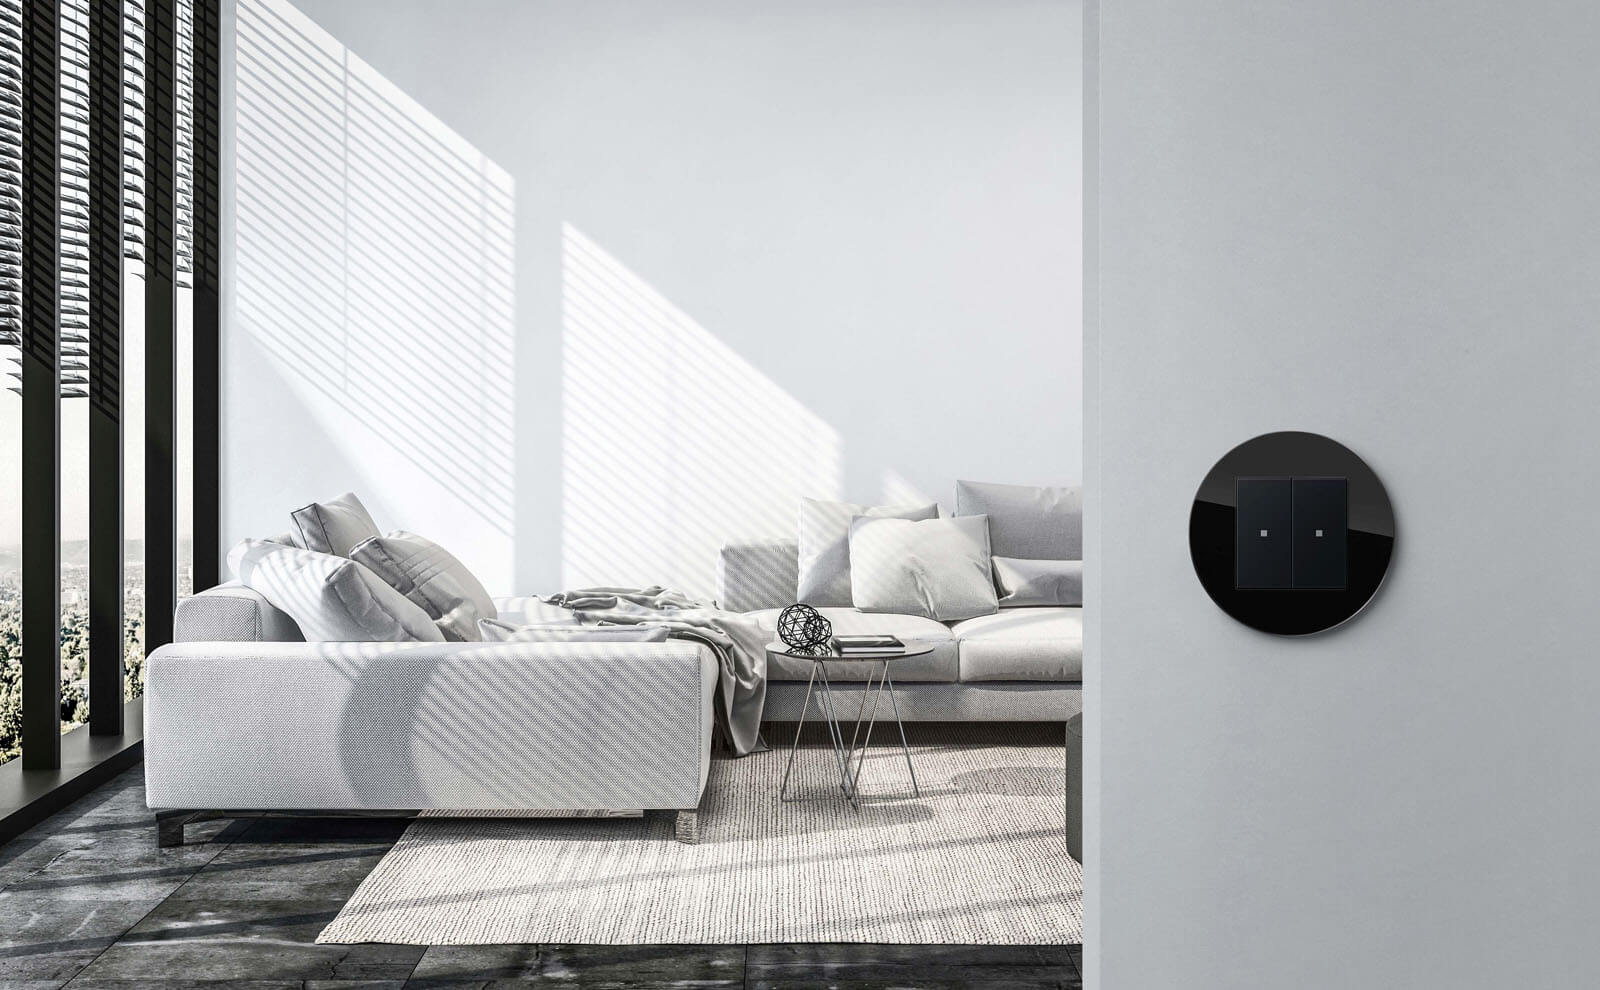 Don't be fooled by its simplistic appearance: the gira button for KNX offers a variety of smart functions. LED night lights & temperature sensor included.